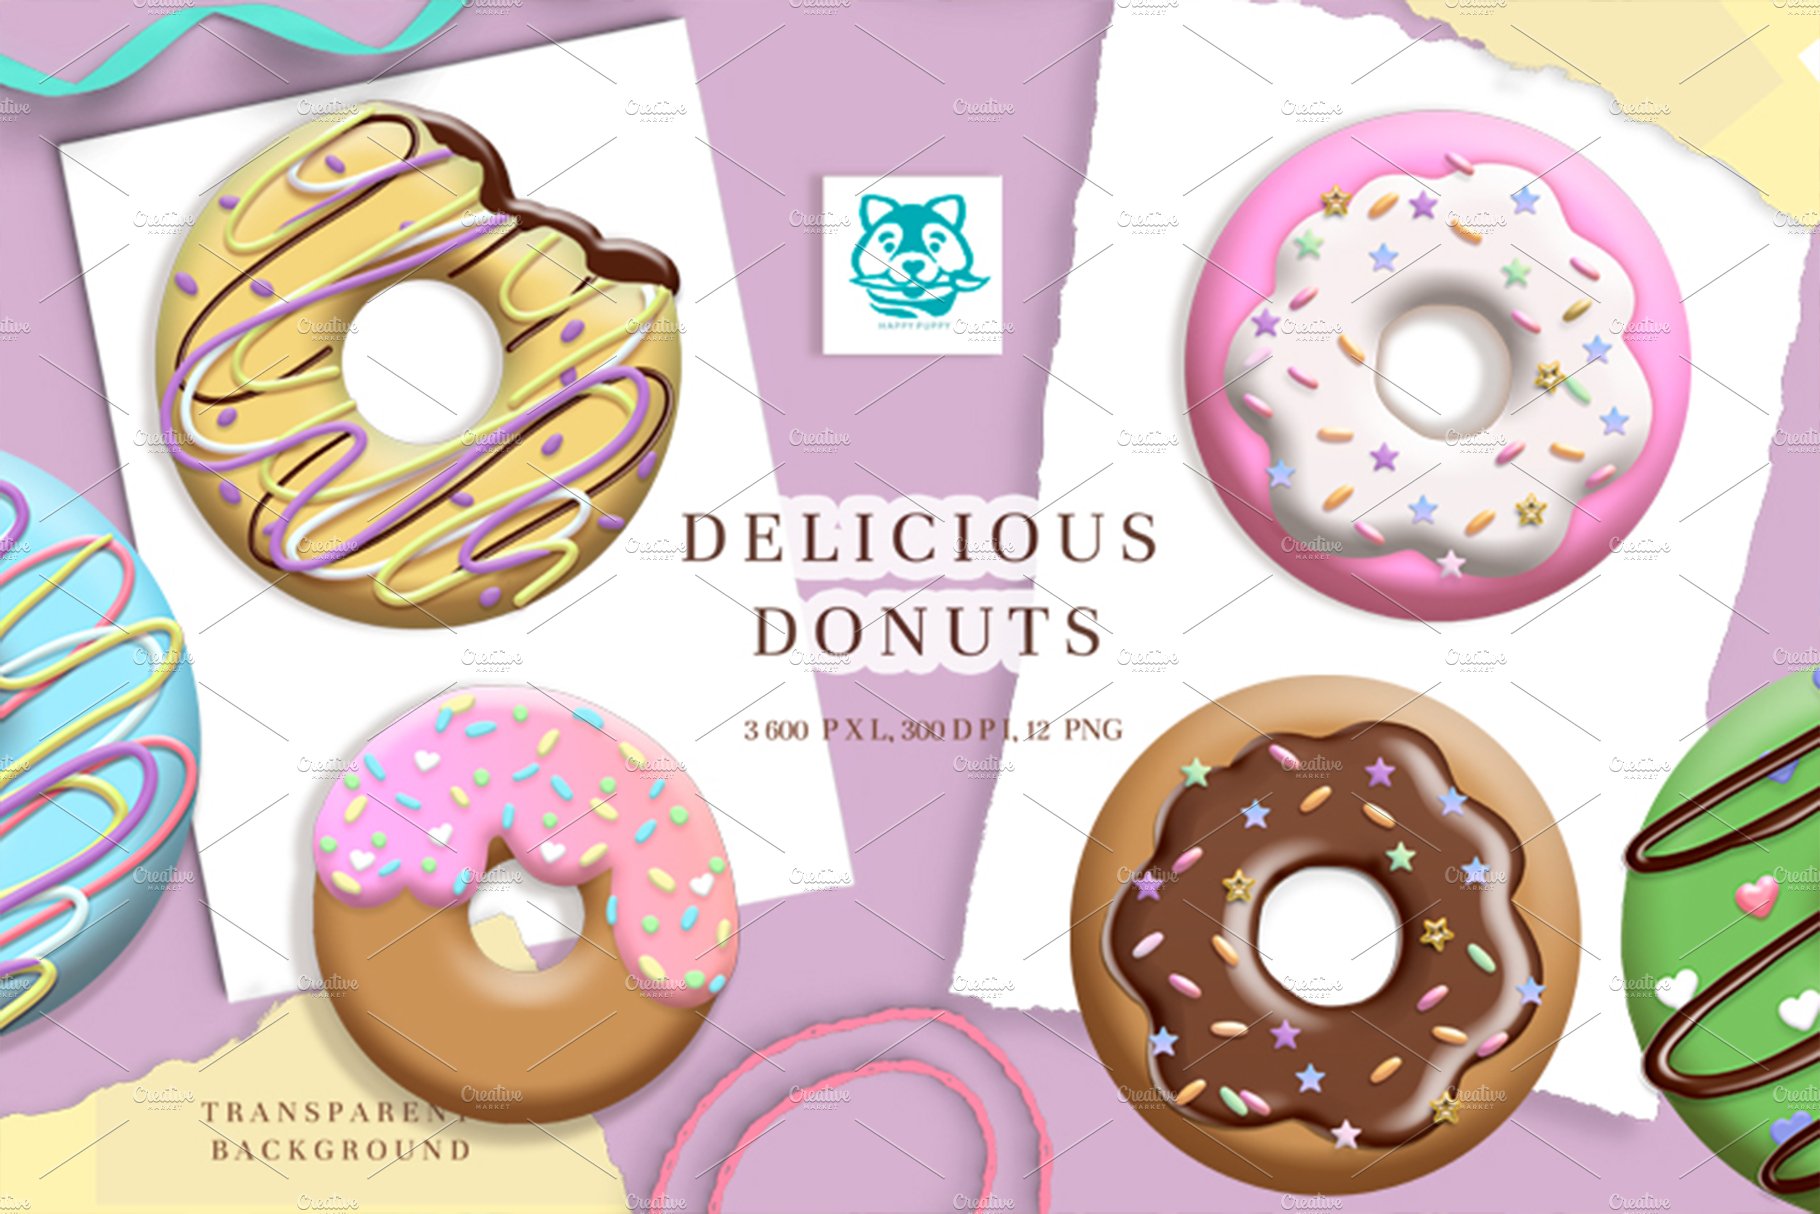 Delicious donuts for you.